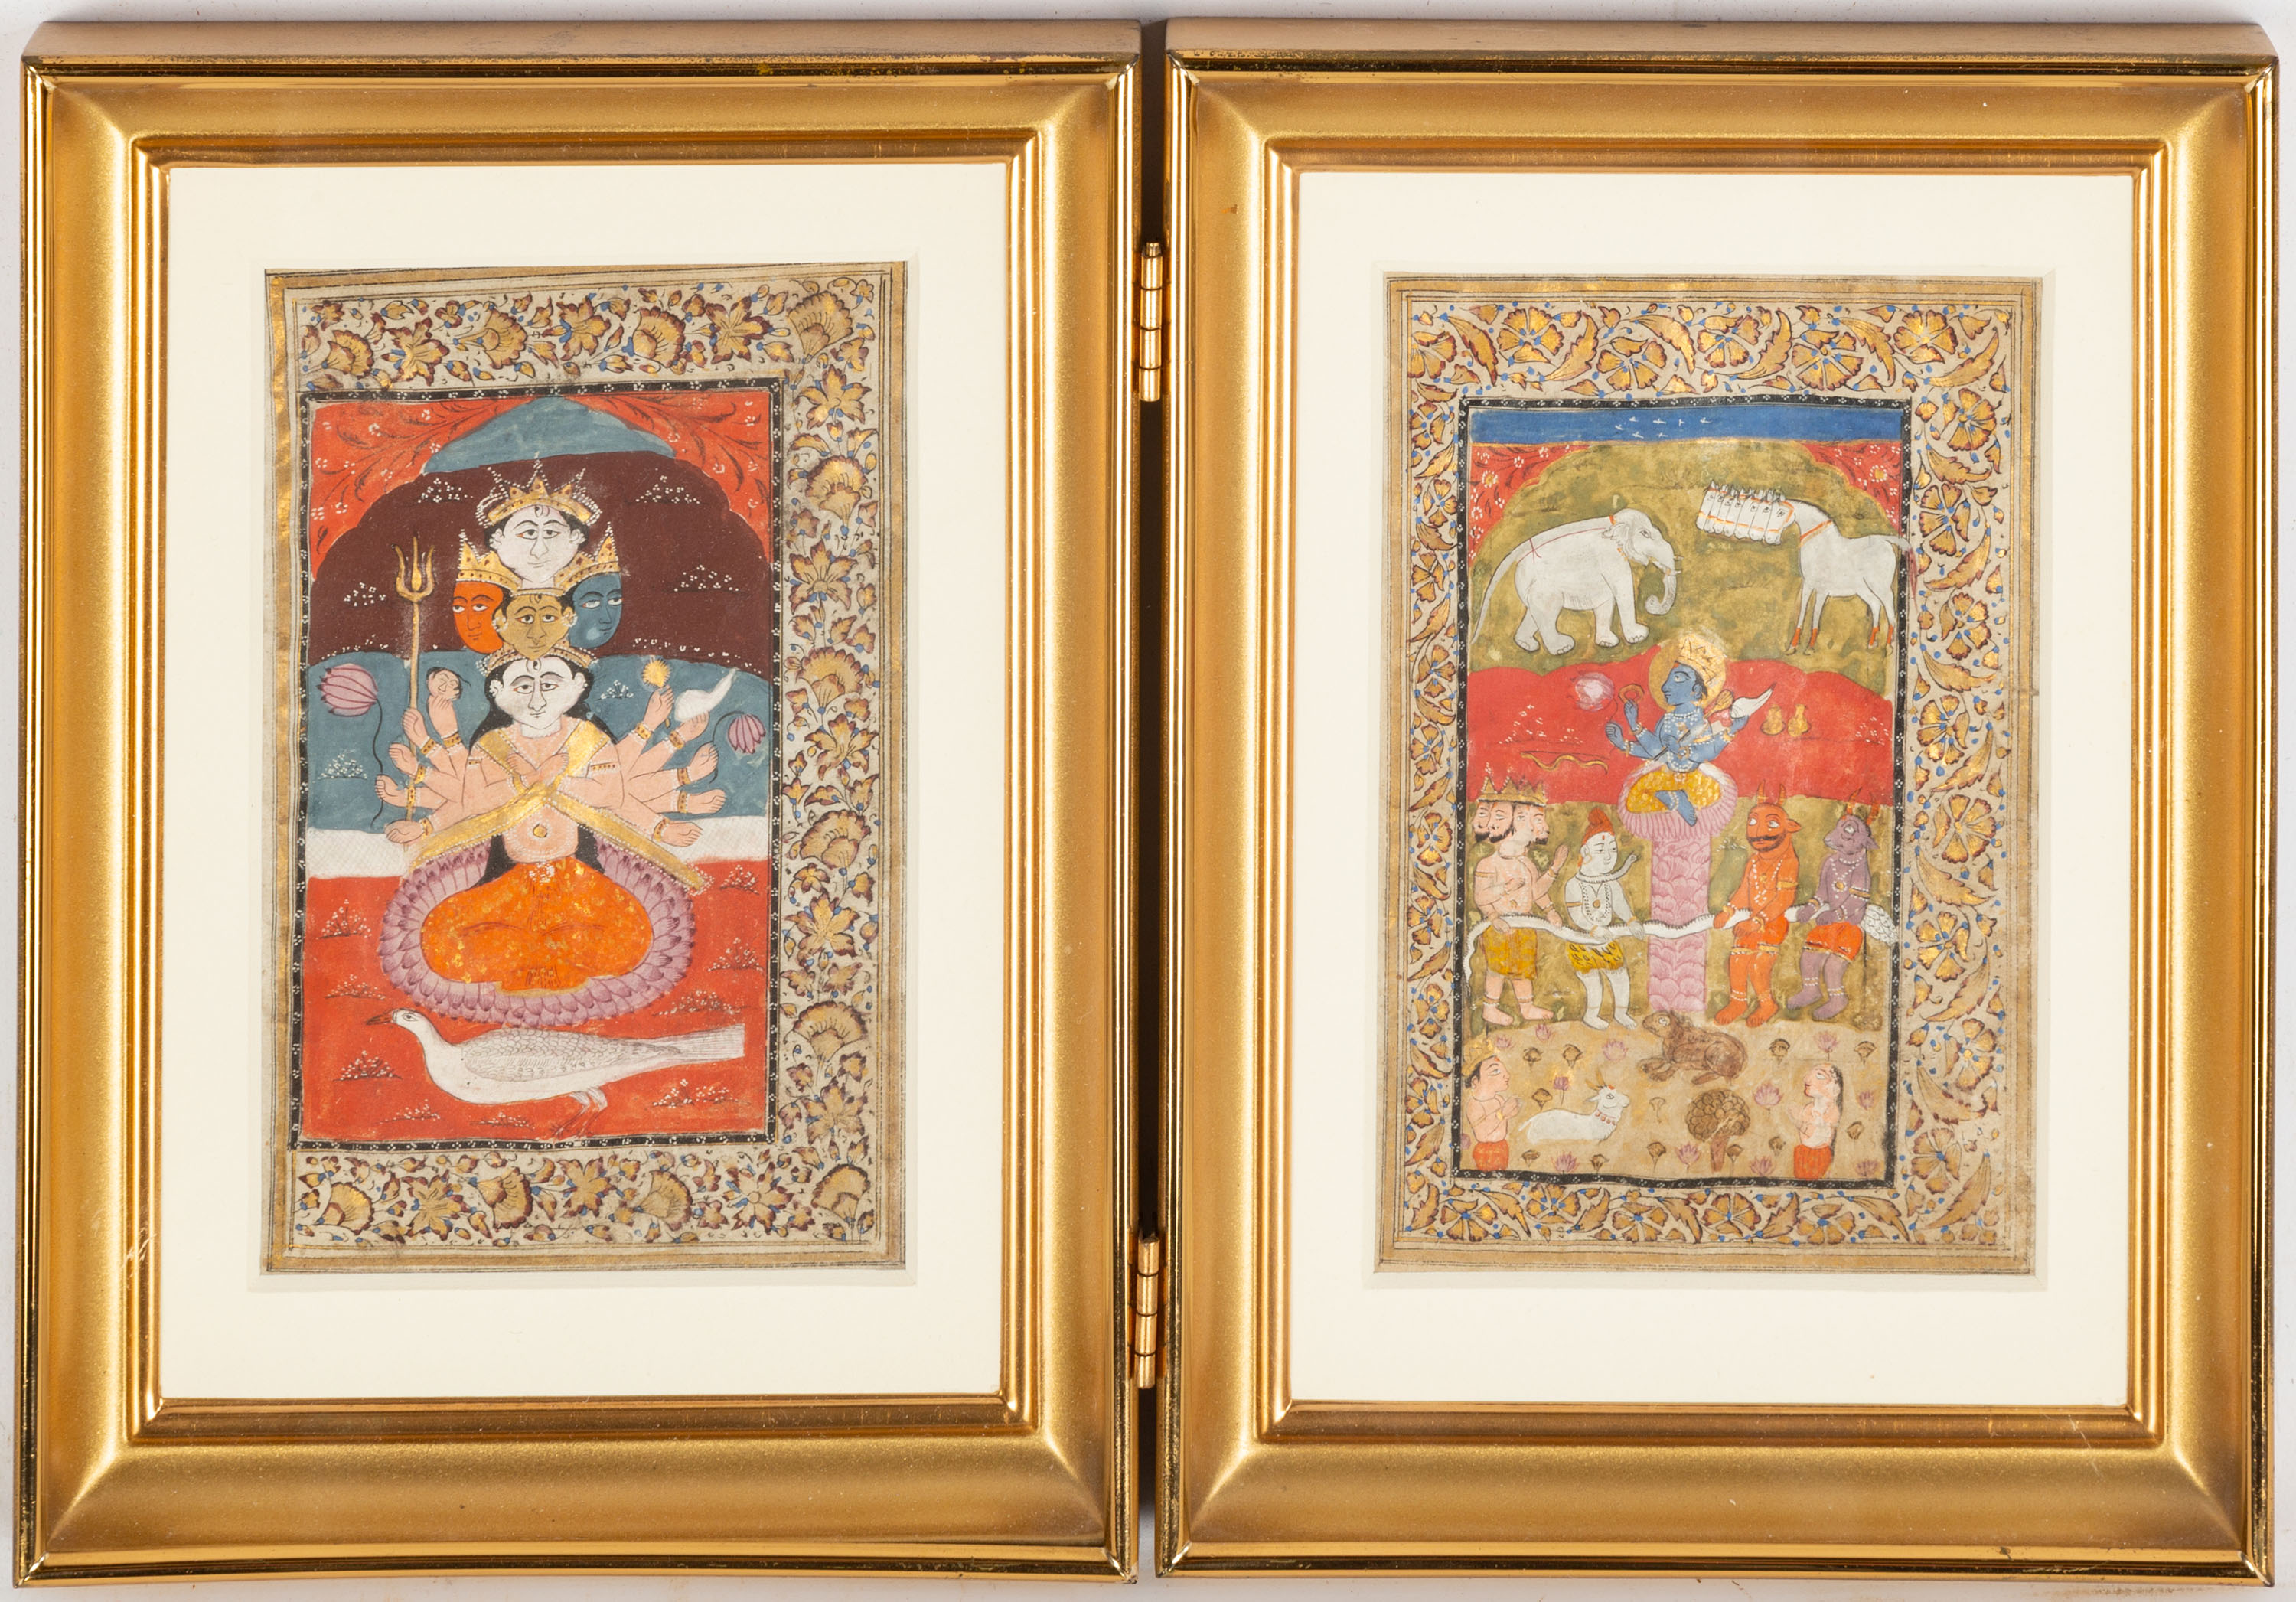 INDO PERSIAN MINIATURE PAINTINGS 28d3f8